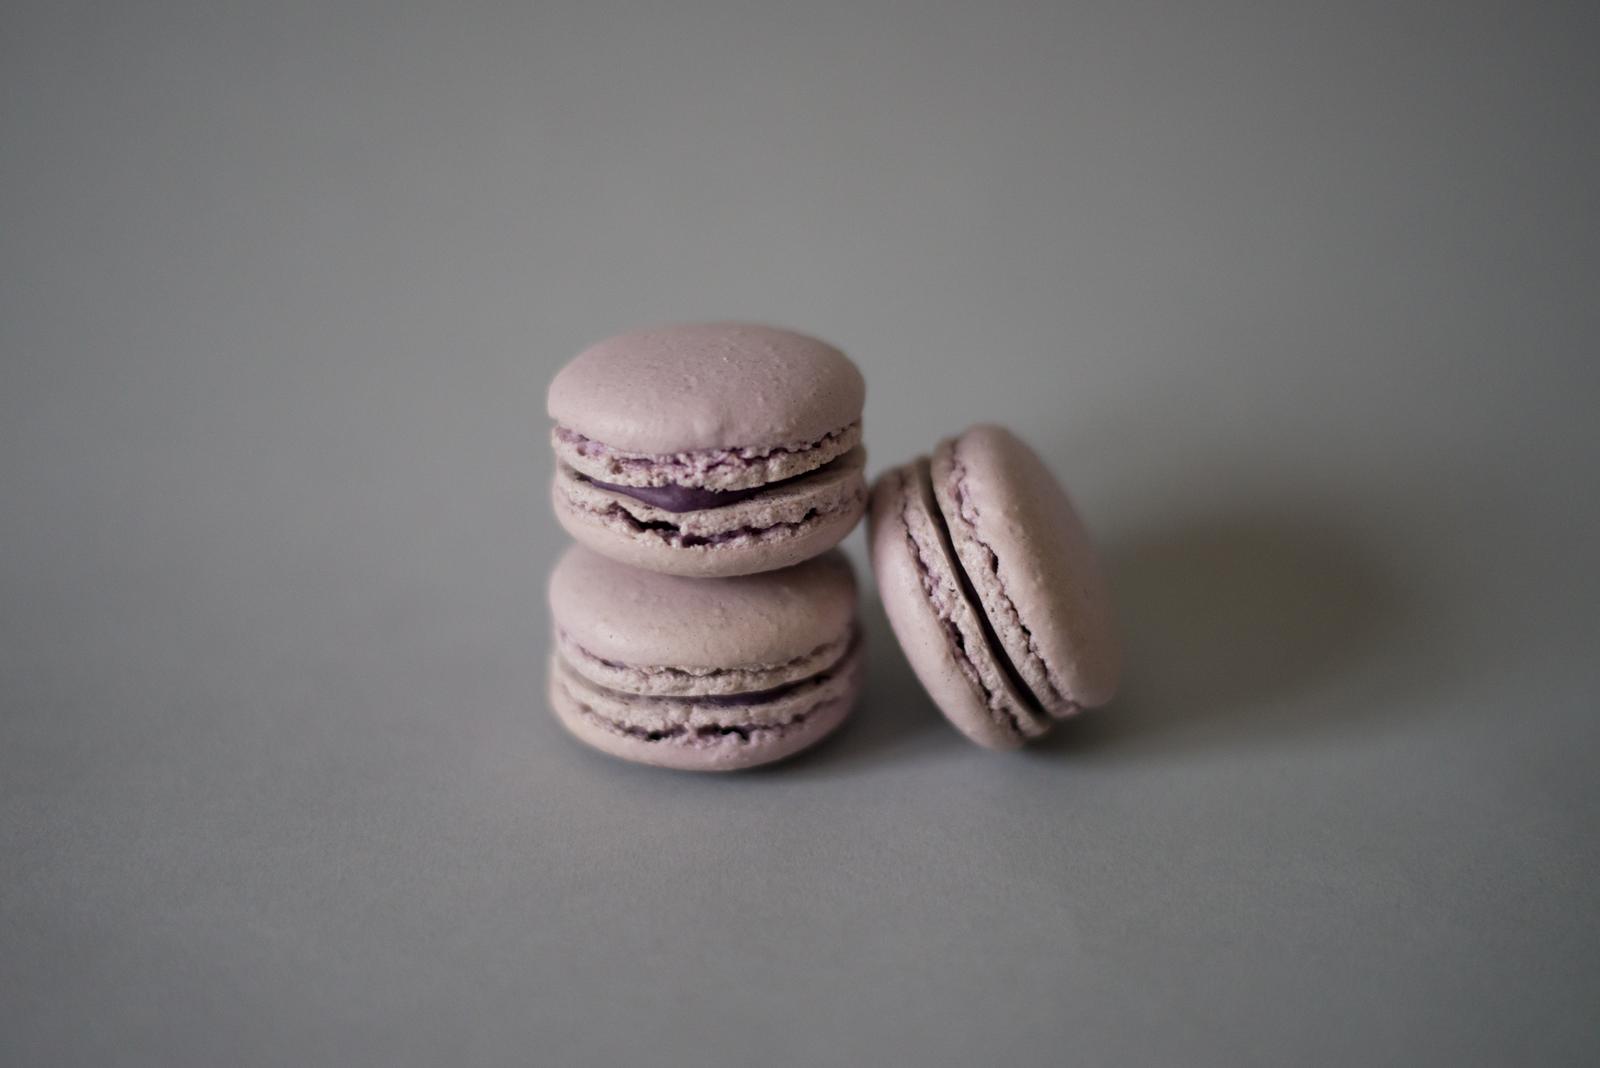 What Aesthetic Am I? Lavender macarons